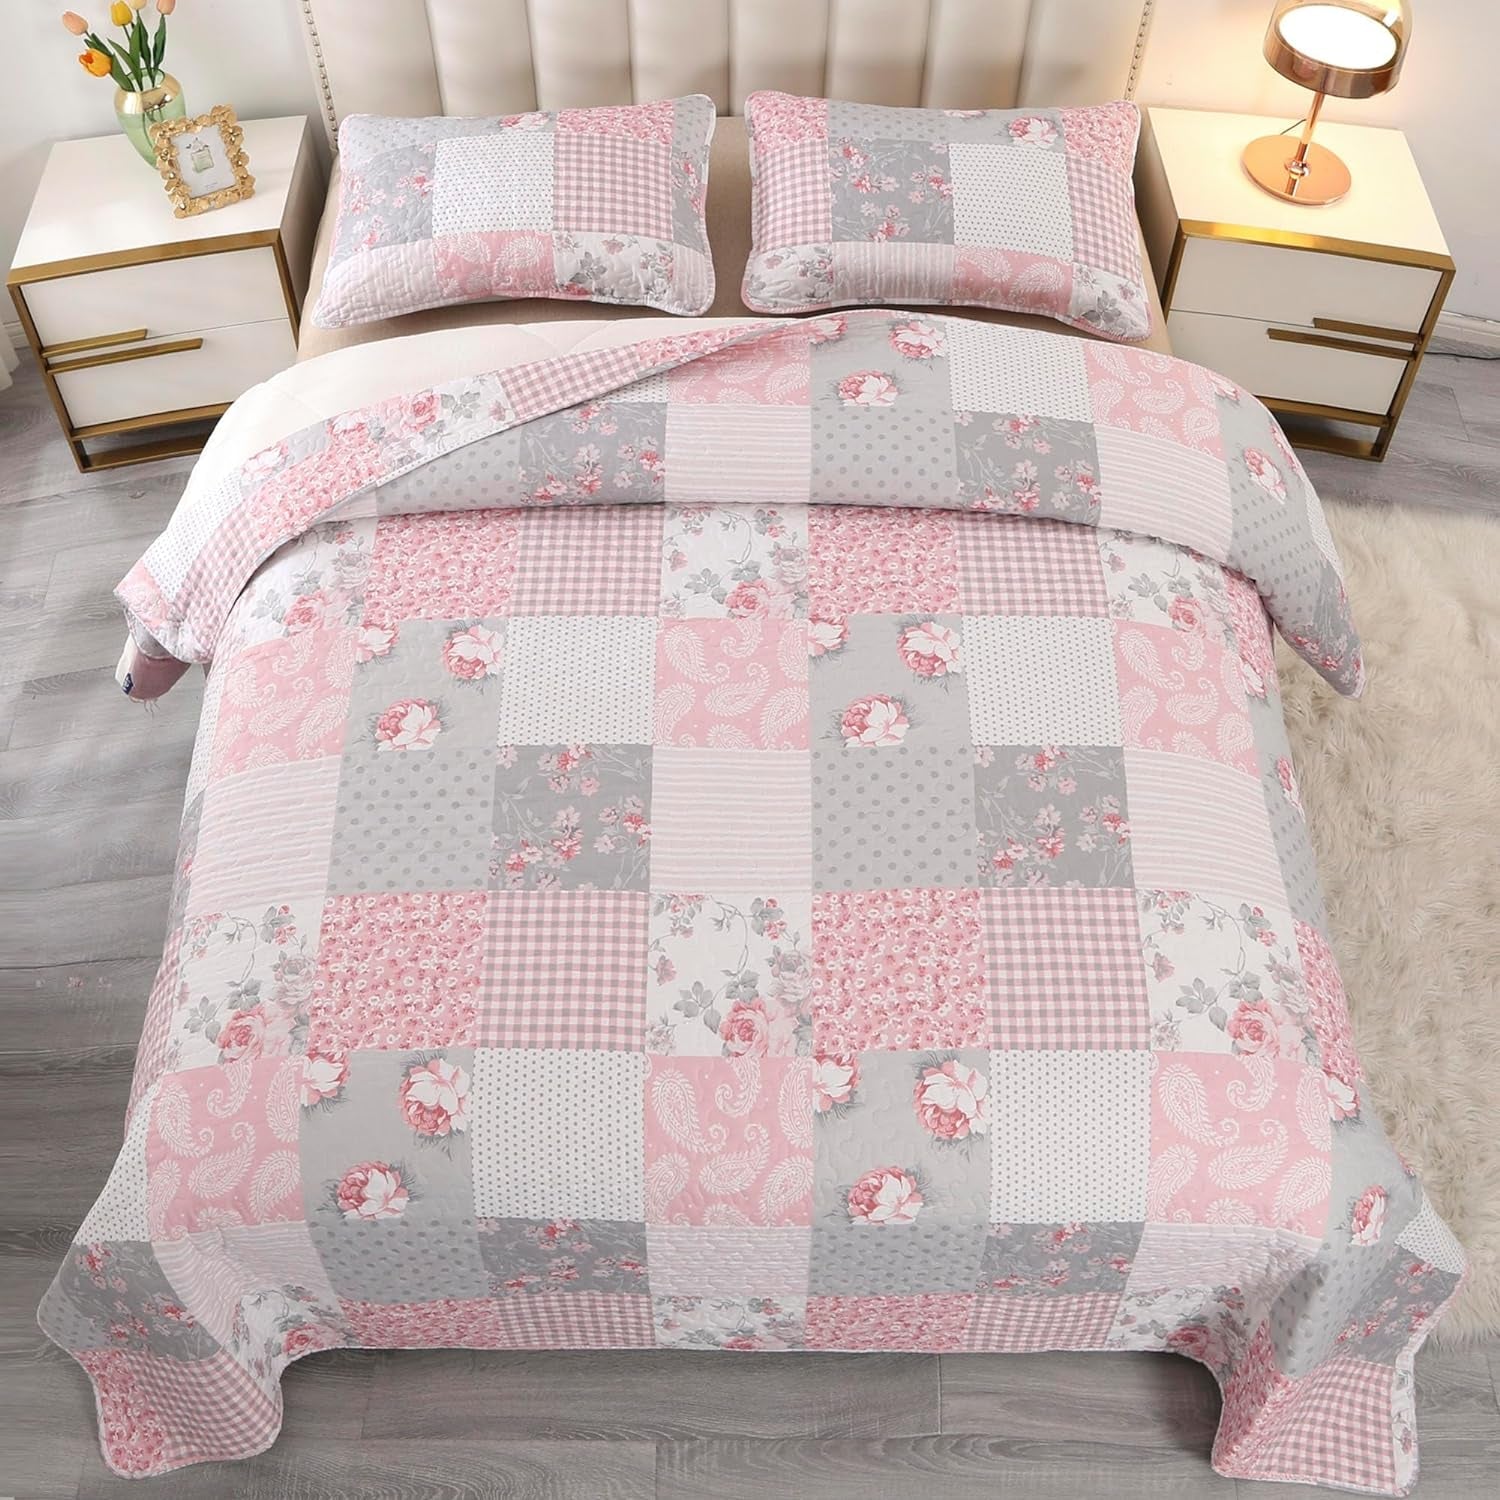 Pink Plaid Patchwork Quilt Set Full Queen Size Floral Rversible Quilted Bedspread Coverlet Set 3-Piece Grey Grid Flowers Lightweight Comforter Bedding Set Bed Sheet Cover Blanket with 2 Pillow Shams